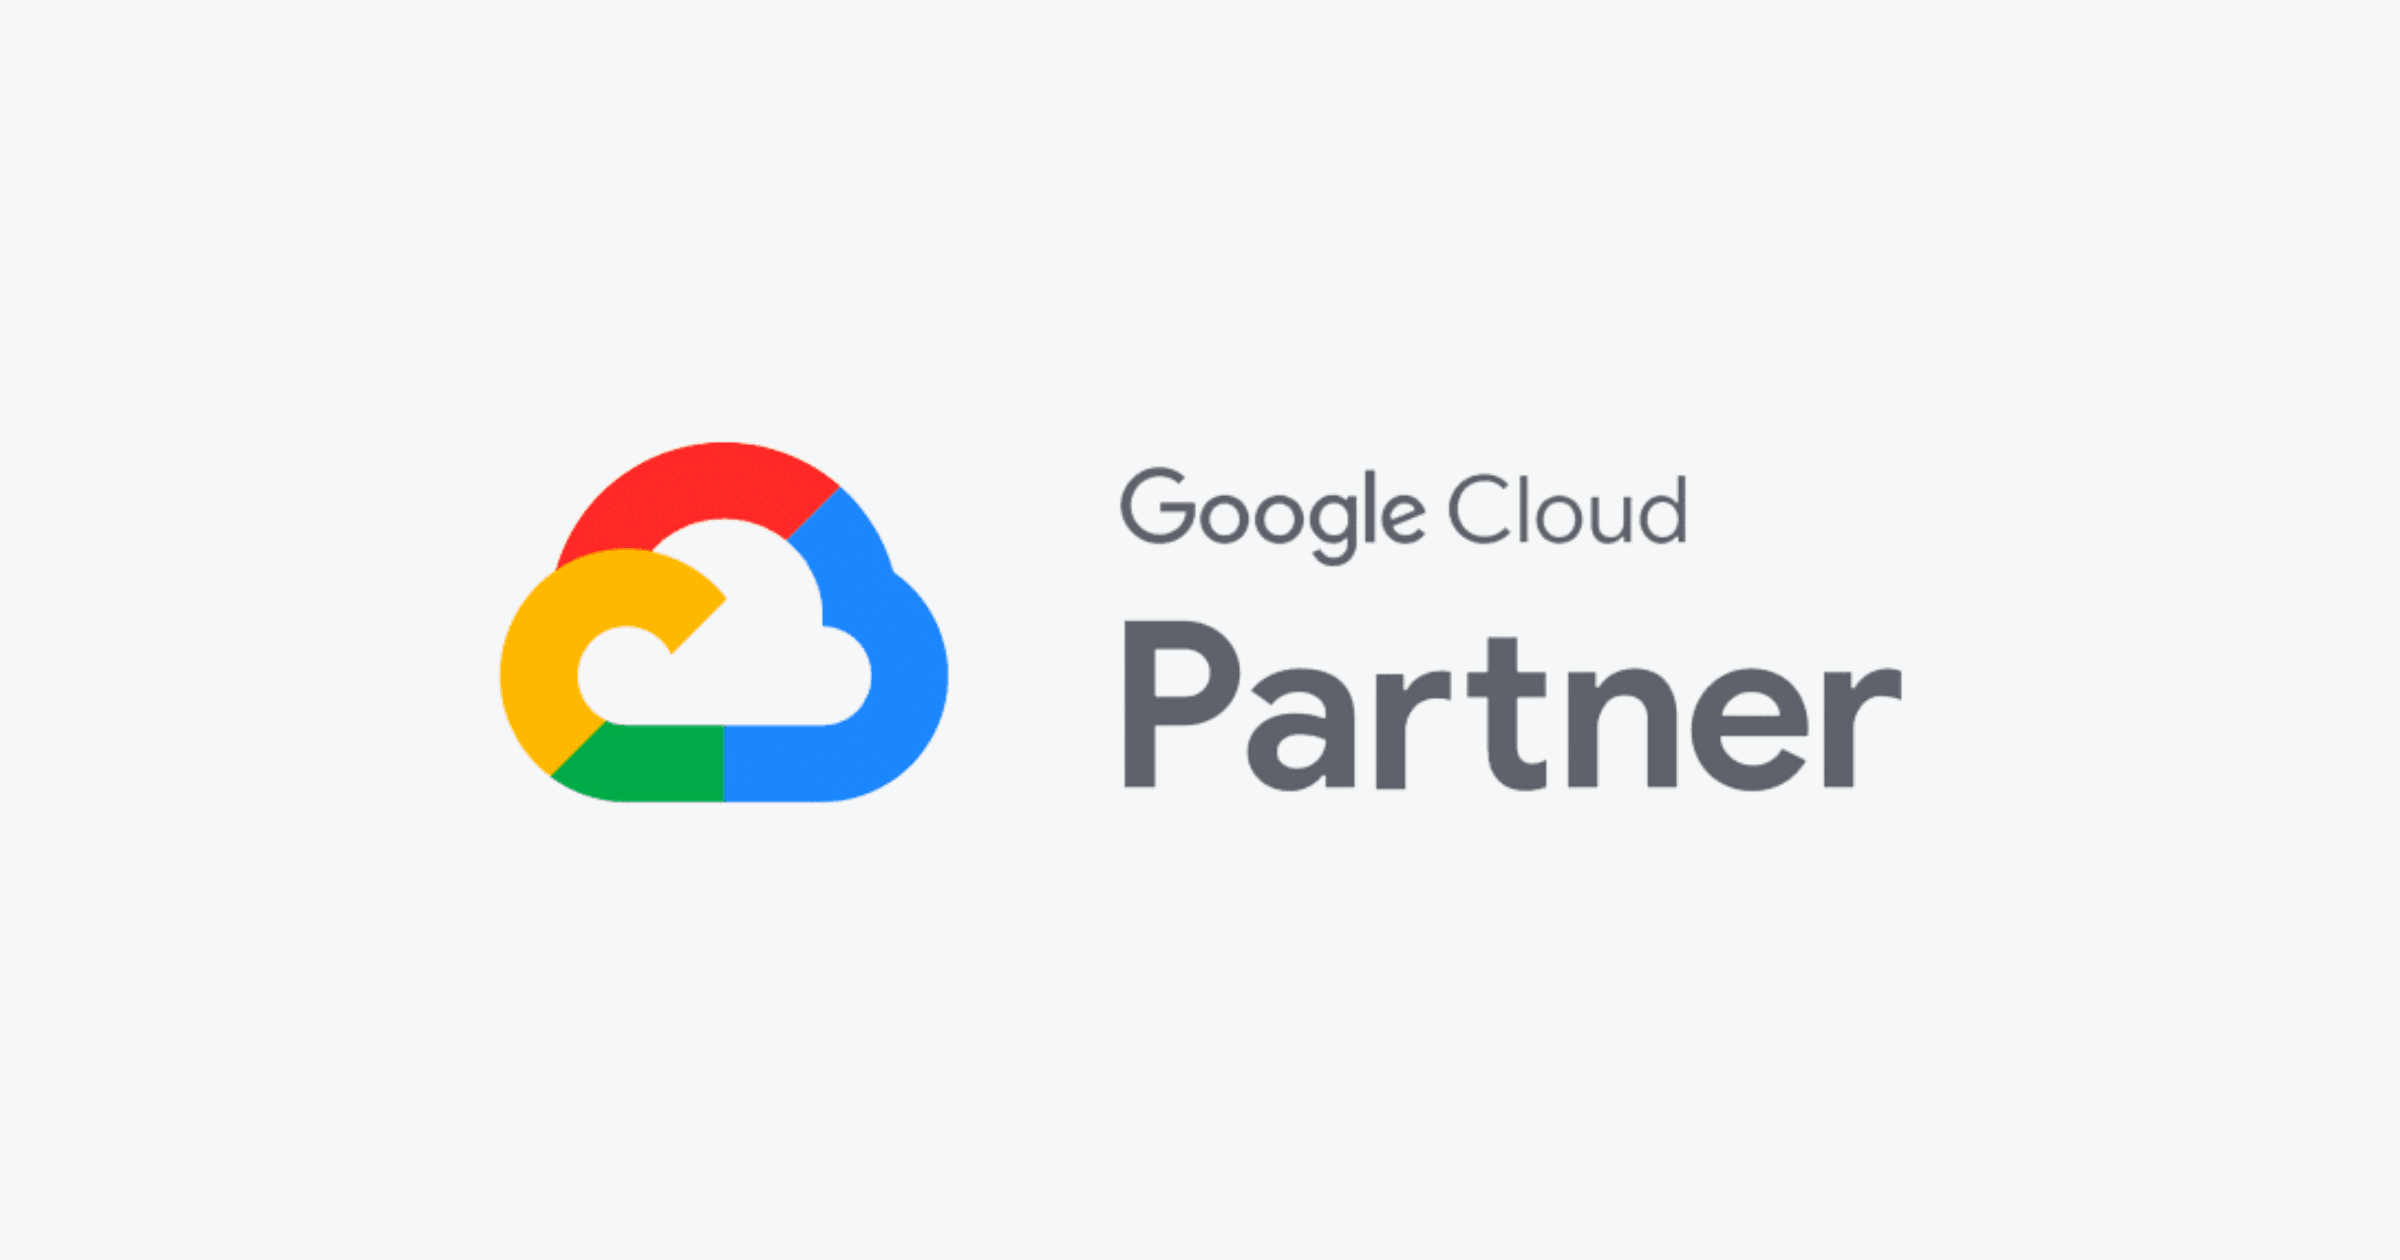 Image showing the Google Cloud logo. Contains text that reads "Google Cloud Partner".